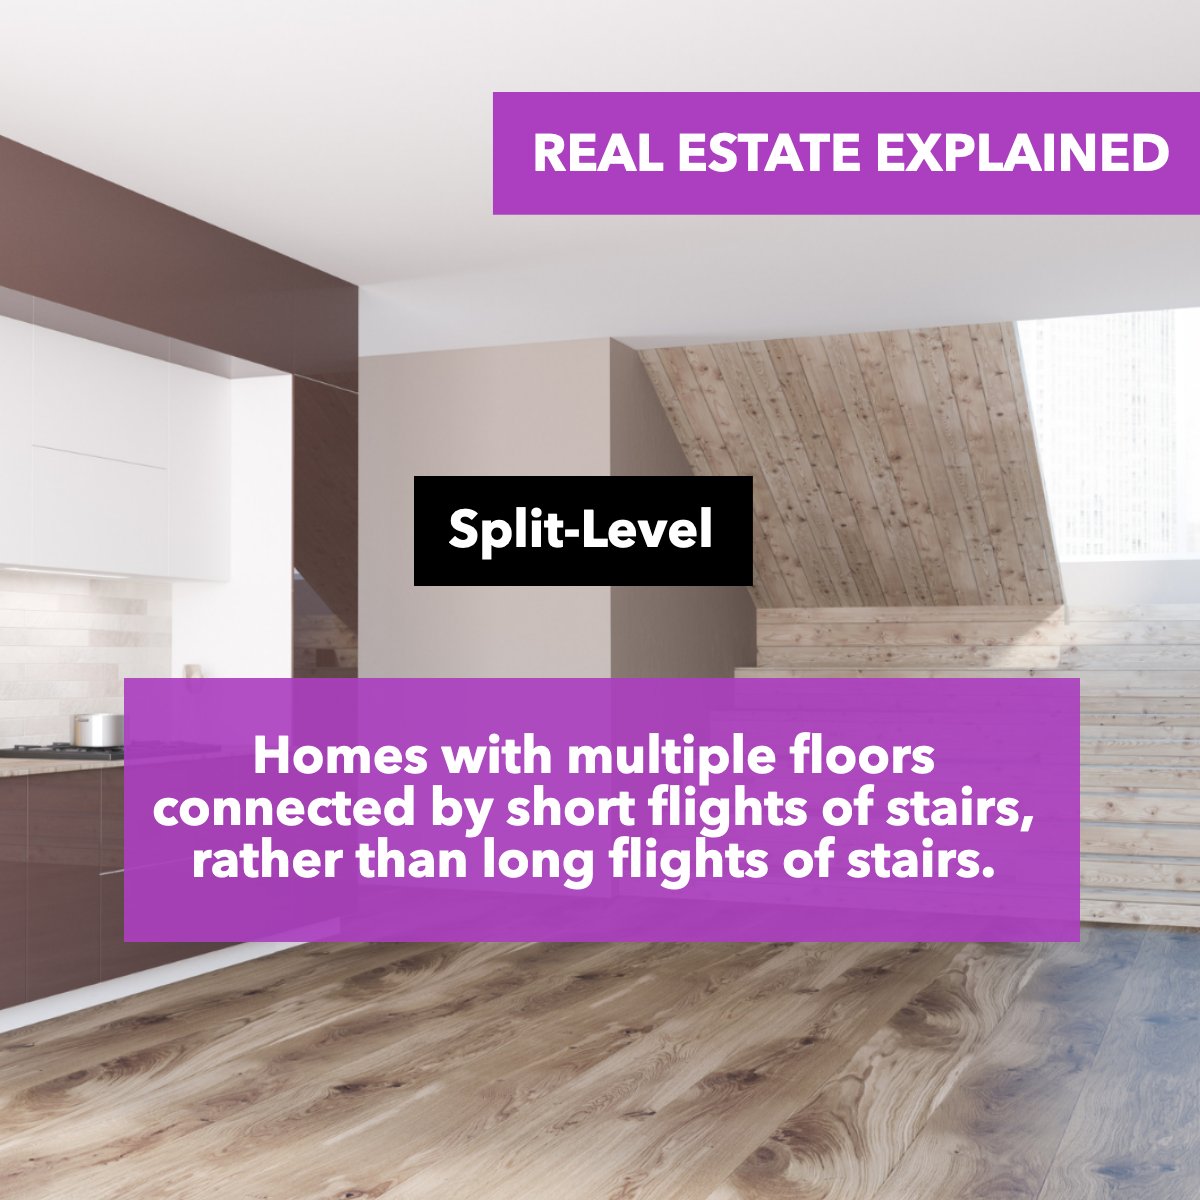 Did you know what a Spit-Level is? 🤔

Is this the type of house that you like?

#splitlevelremodel #splitlevelhome #splitleveldesign
 #SchuylerRealty #KellerWilliamsRealty #GroveCityRealEstate #KellerWilliamsConsultants #MarineCorpsVeteran #MilitaryHomebuyers